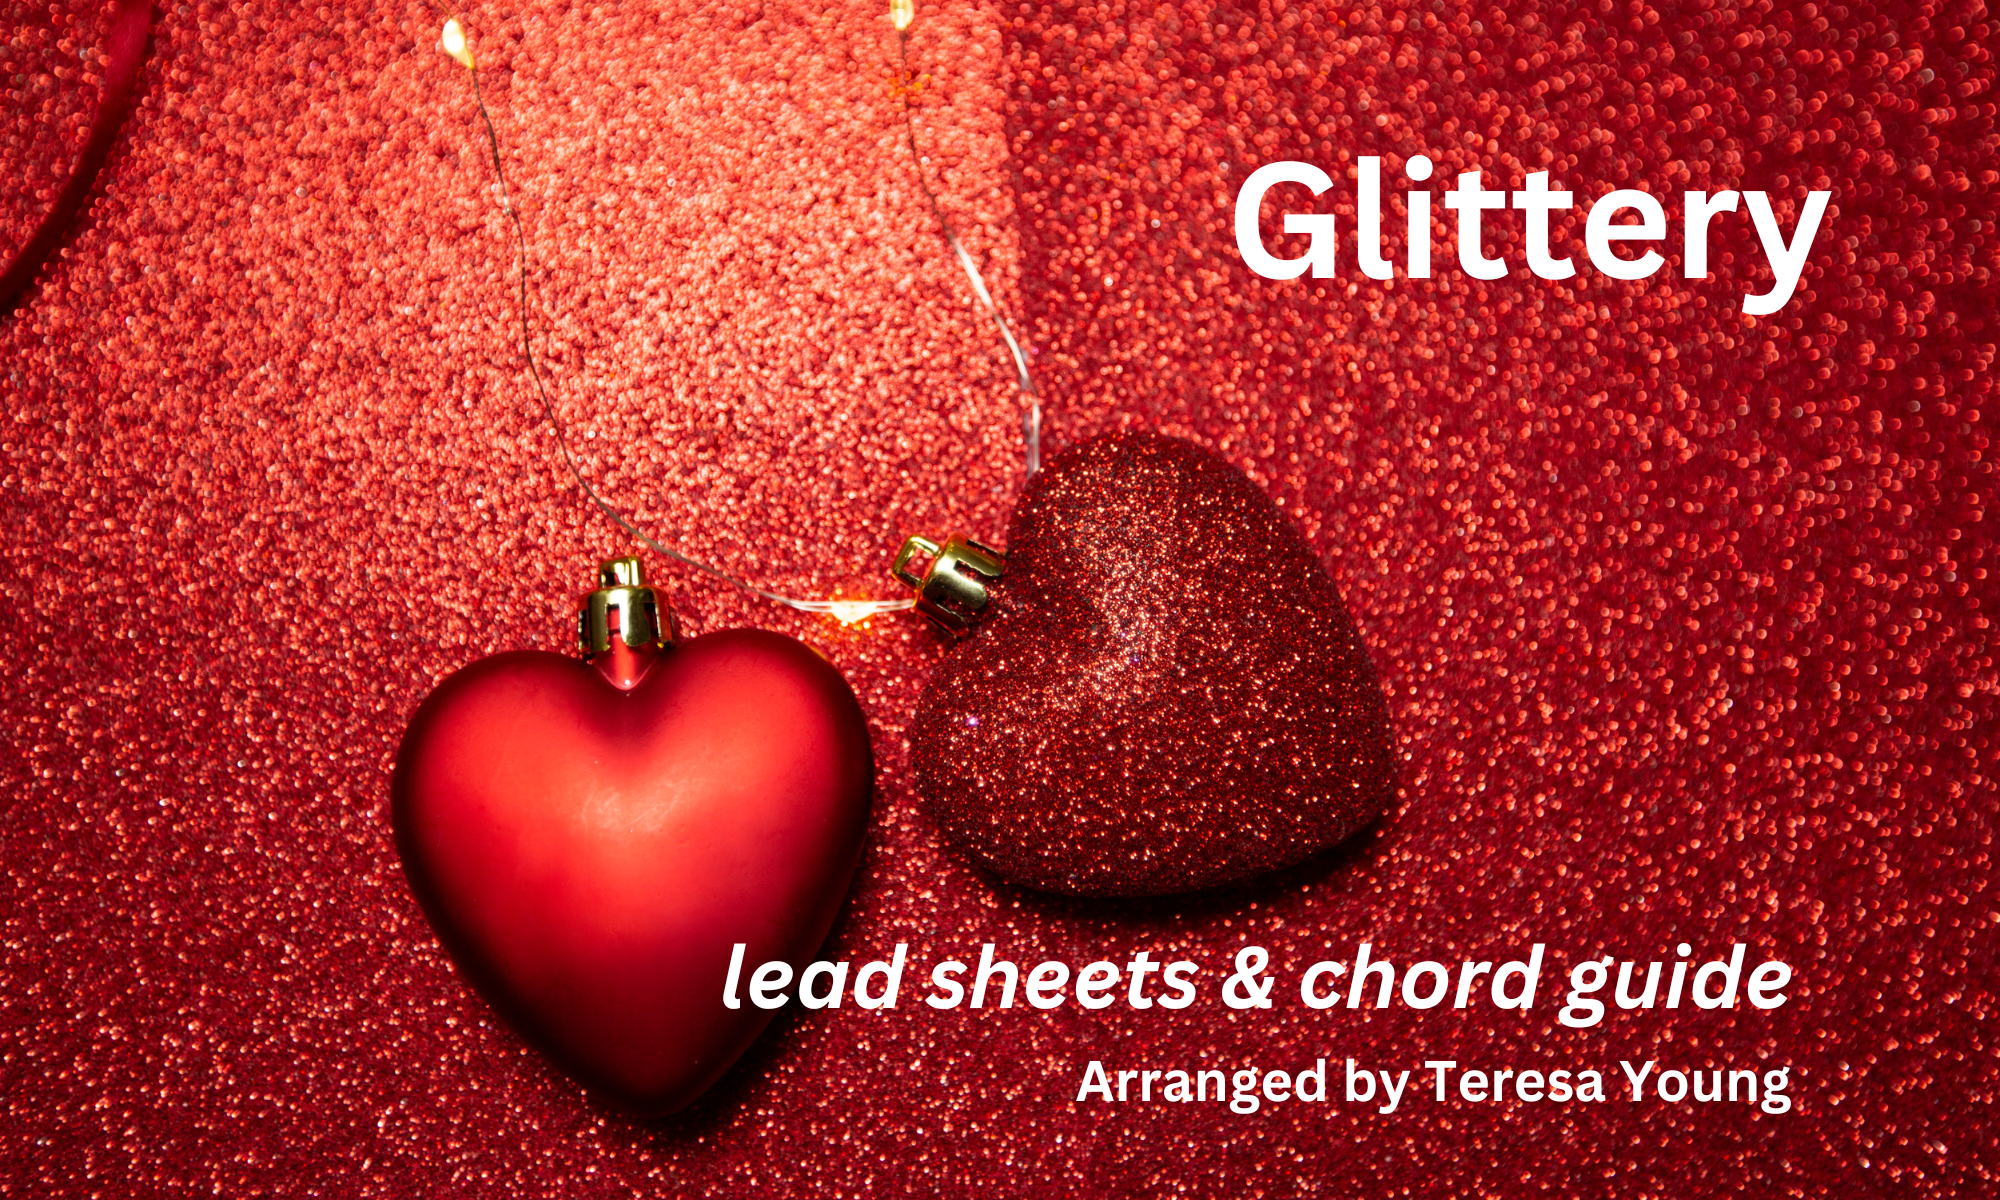 Glittery lead sheets & chord guide, arranged by Teresa Young